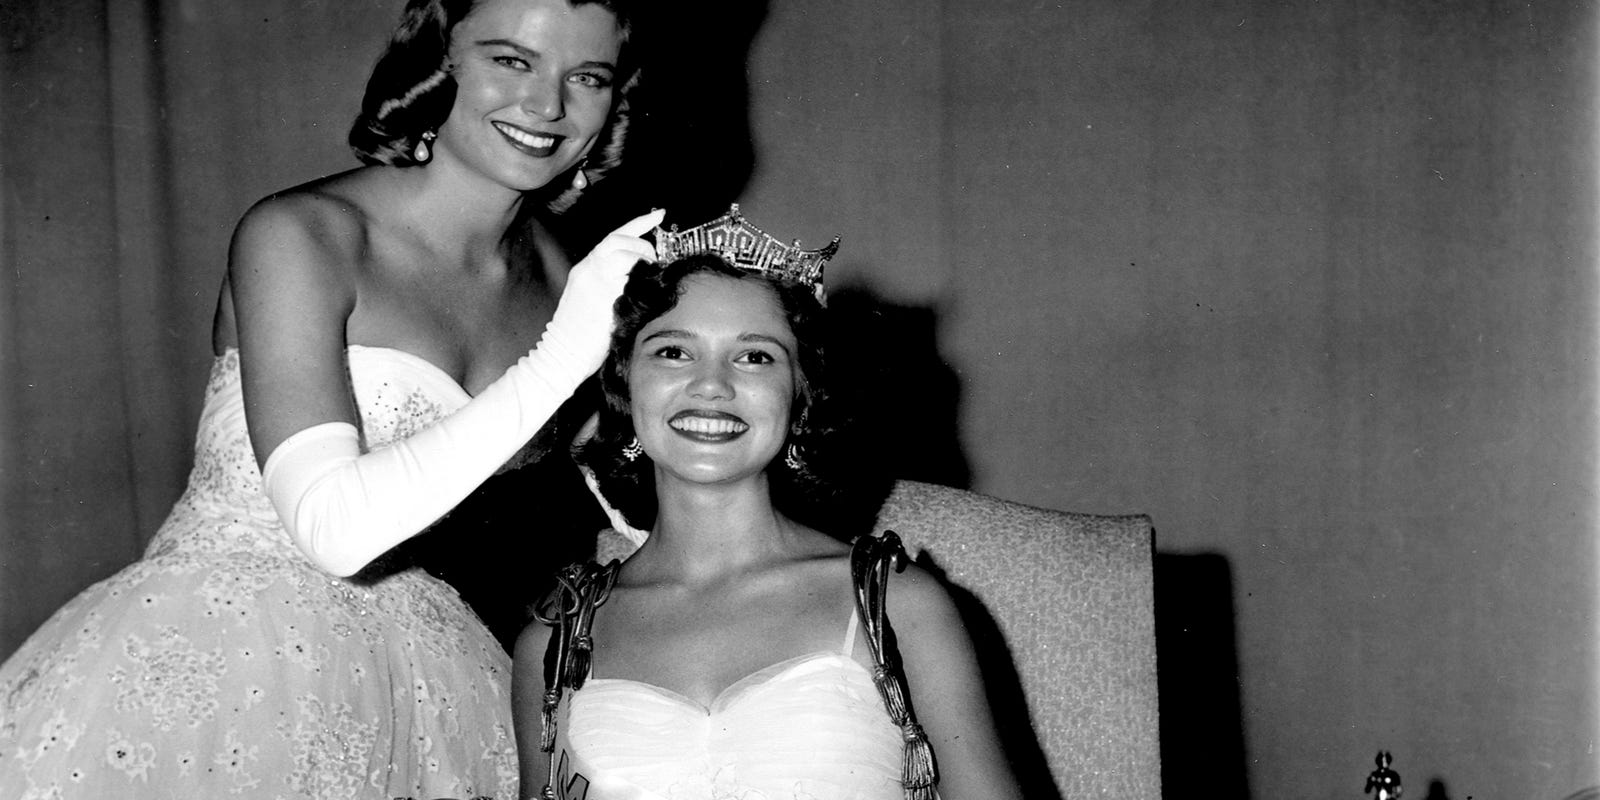 Junior Miss Nudist Pageants - Mary Ann Mobley, former Miss America, dies at 77